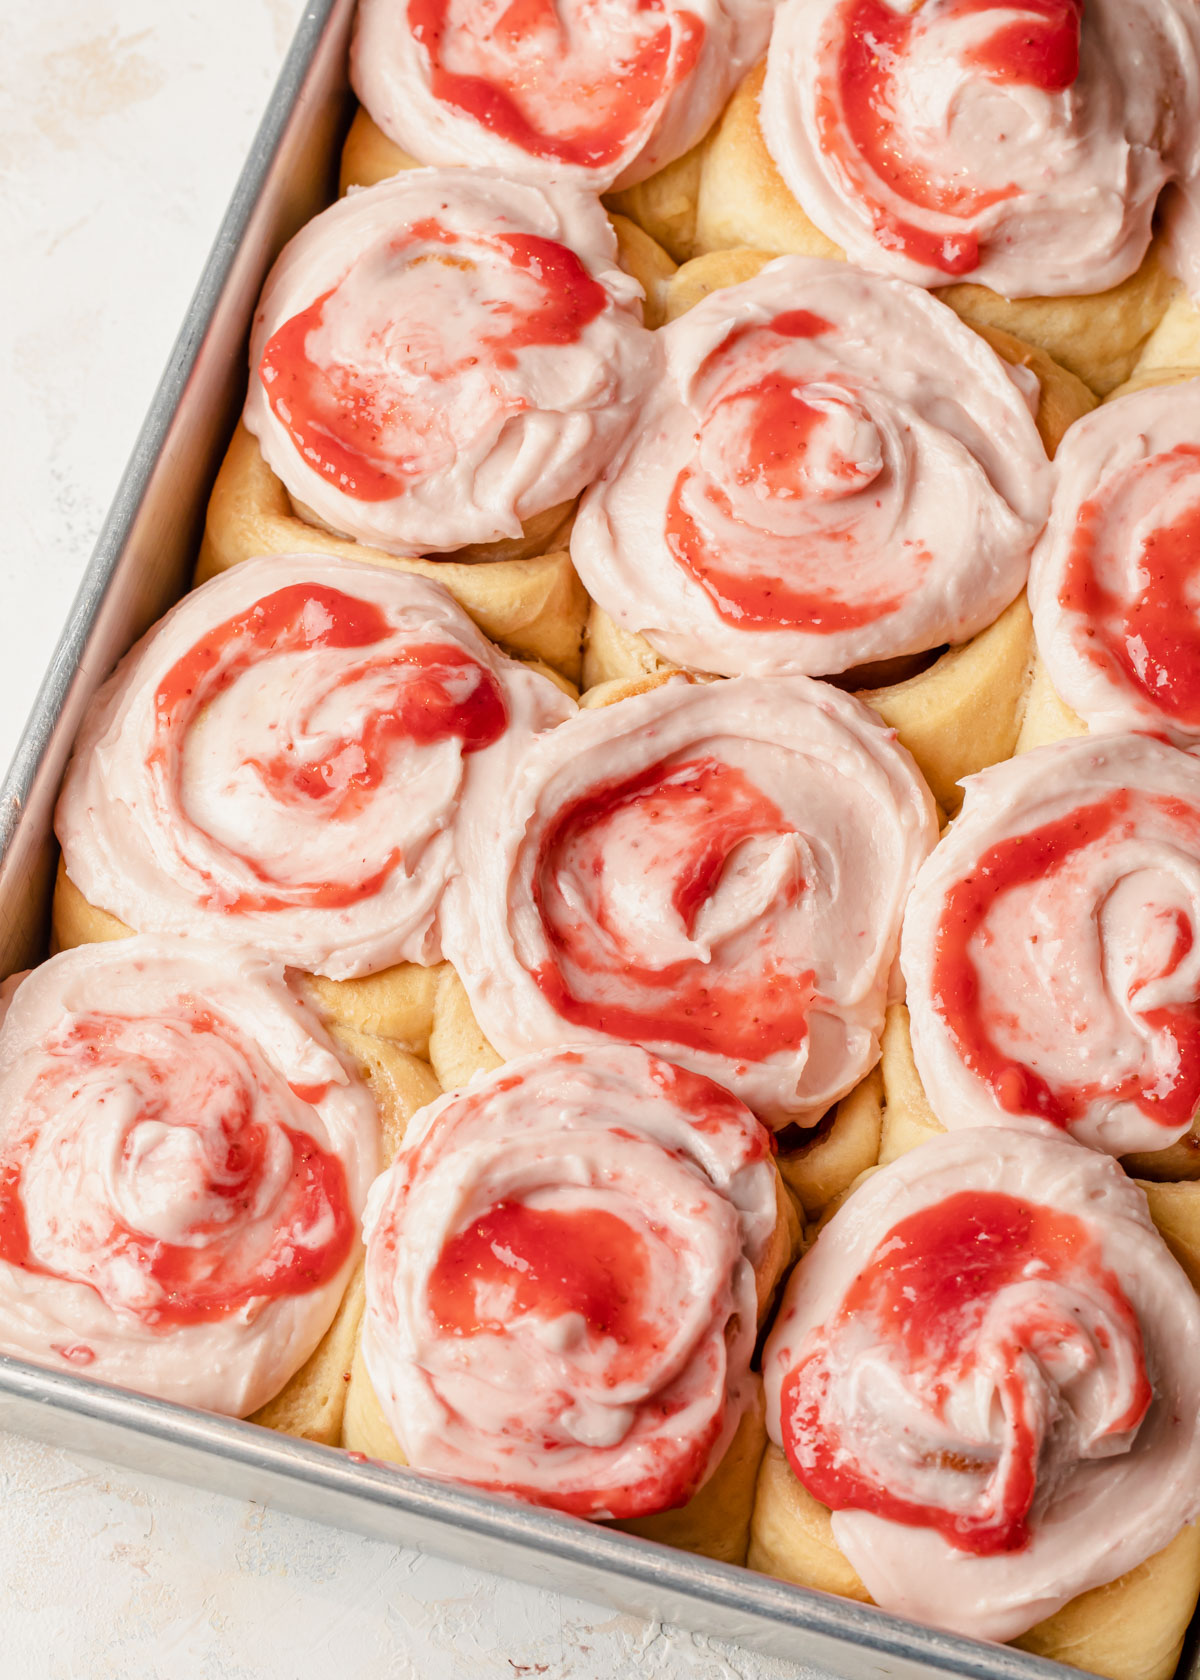 A baking tray full of baked jam rolls with strawberry cream cheese and jam topping